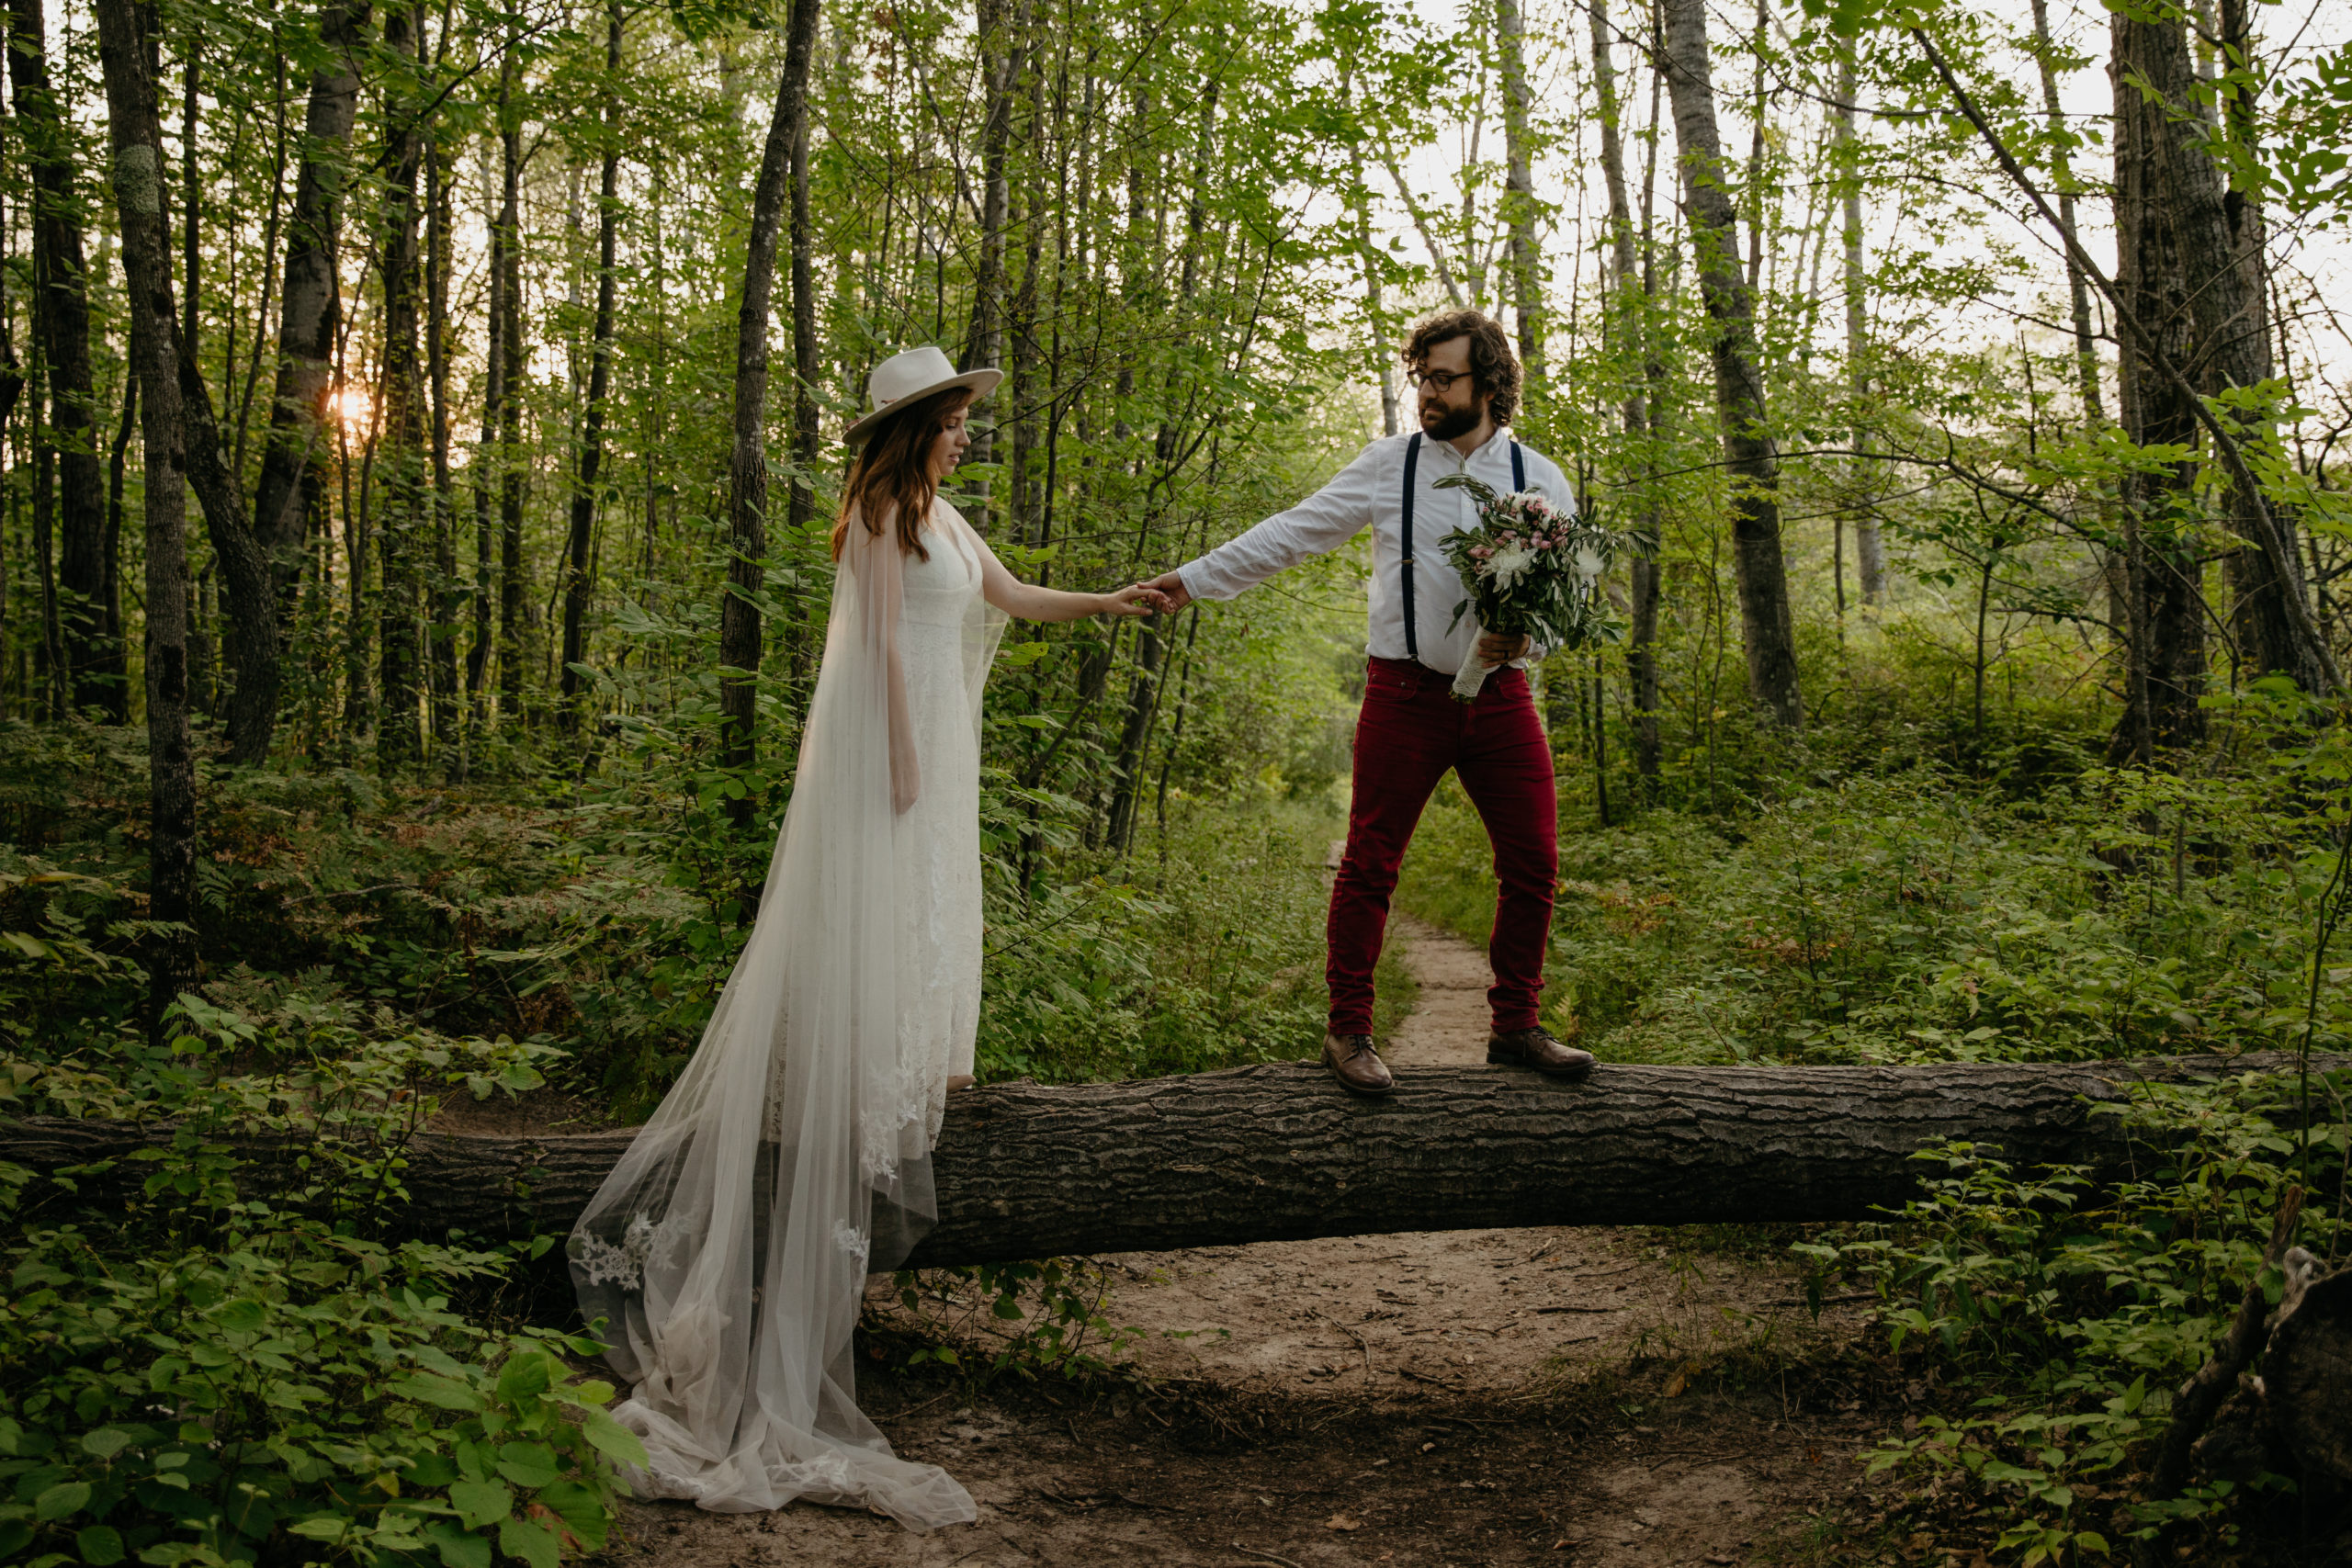 Magical Manistee Forest Elopement in Michigan // An elopement out of a fairytale